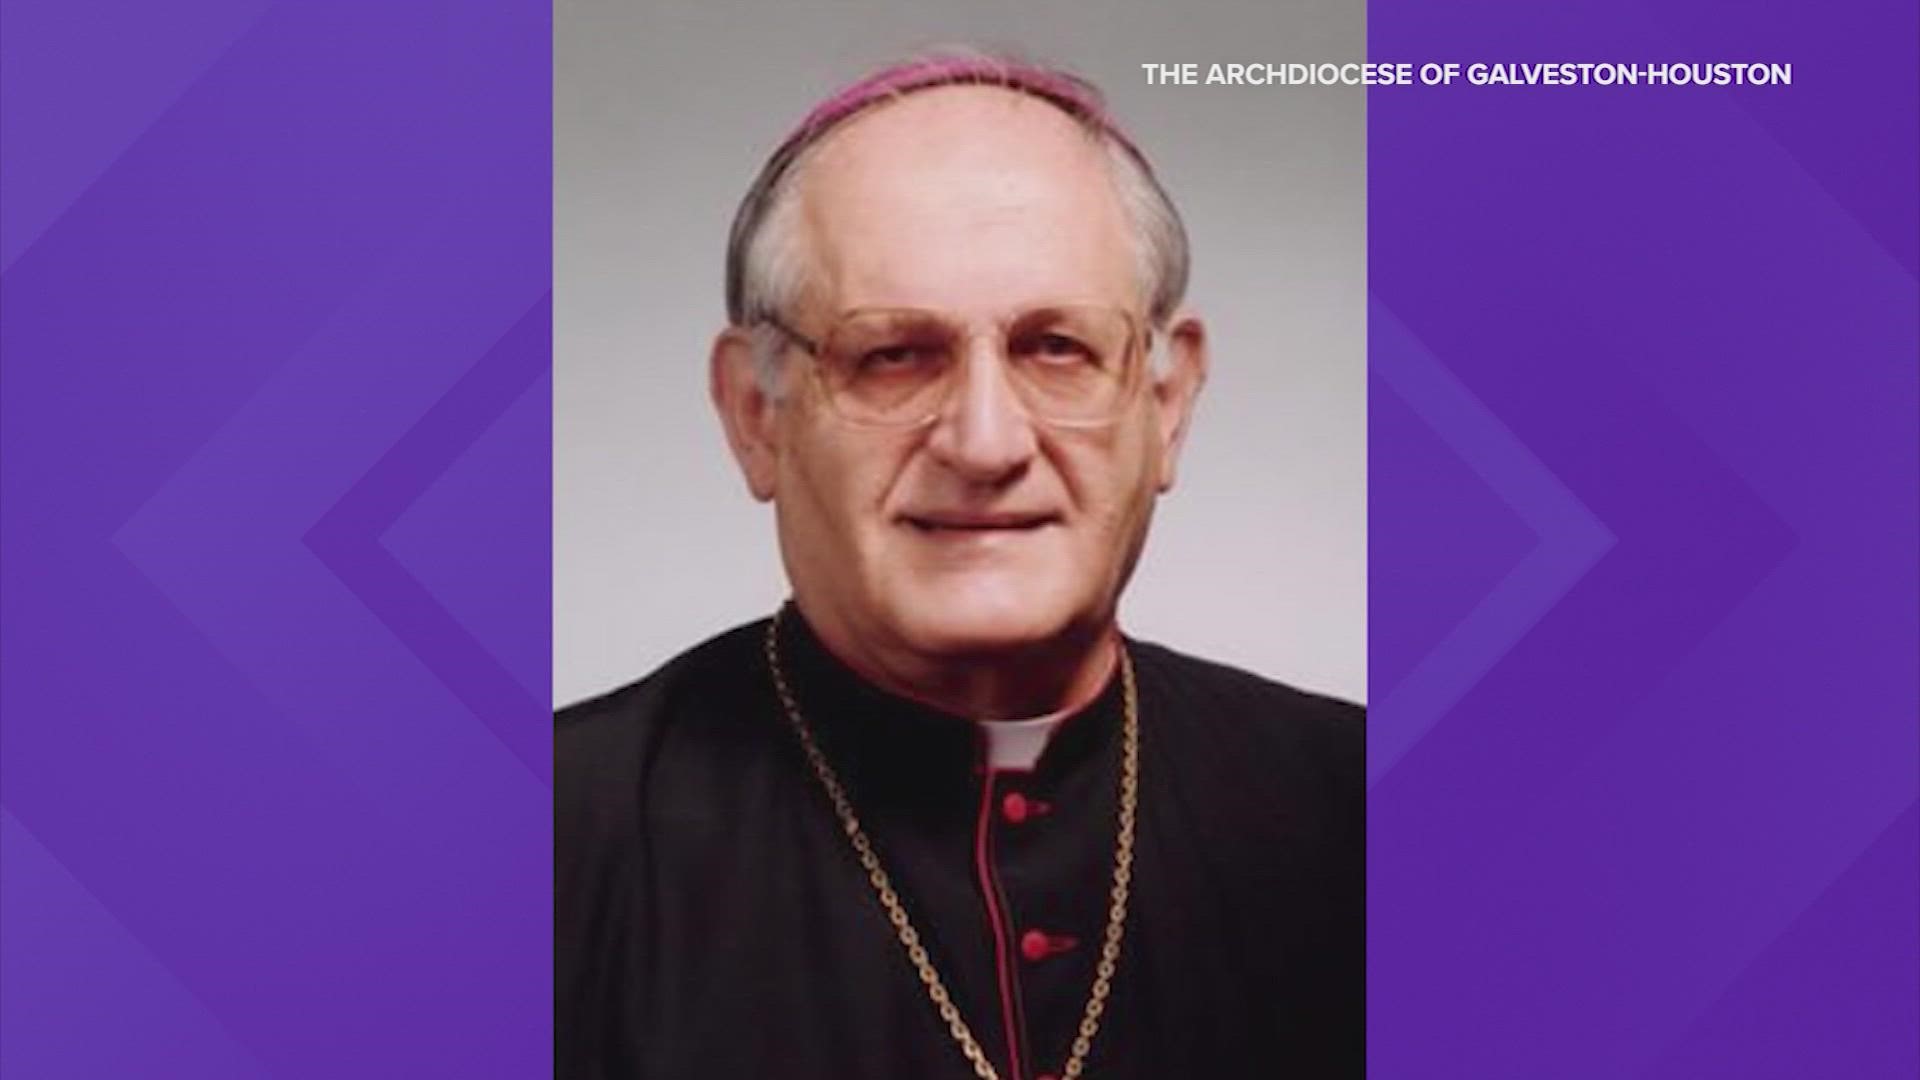 The Archdiocese of Galveston-Houston posted on its website that Fiorenza was a "tireless social justice advocate" throughout his priesthood.